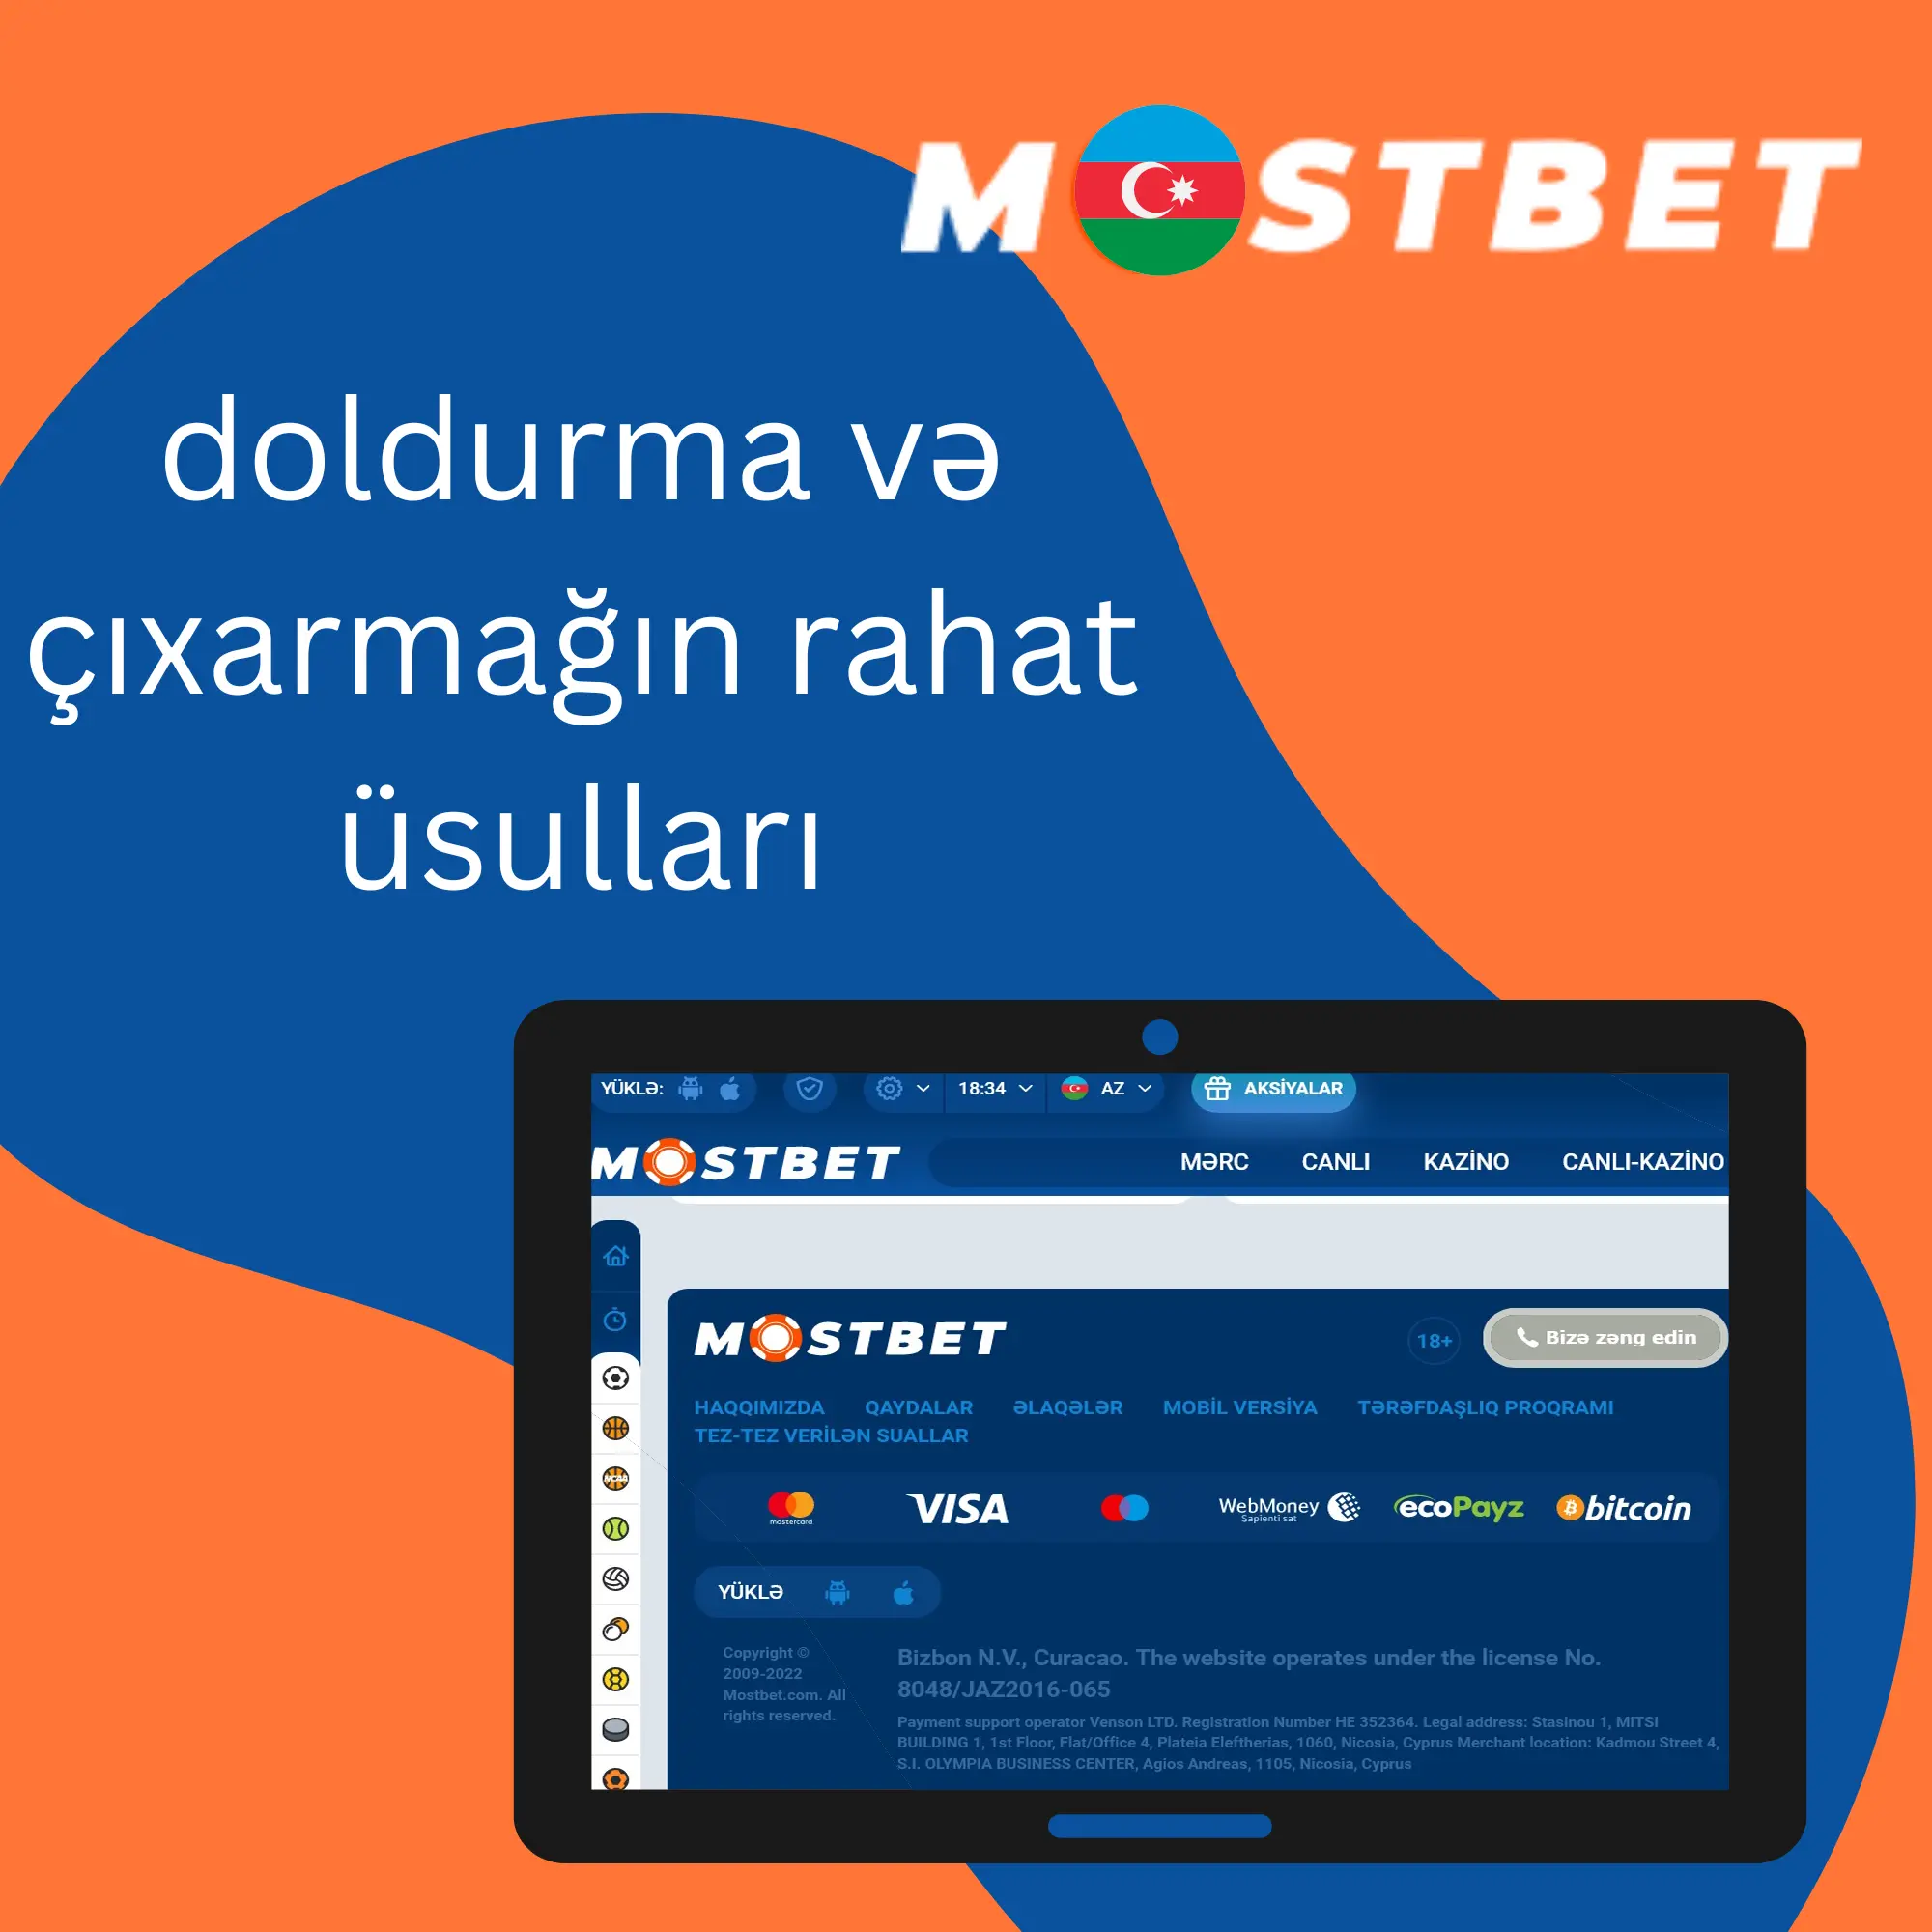 10 Unforgivable Sins Of Mostbet bookmaker and online casino in Azerbaijan